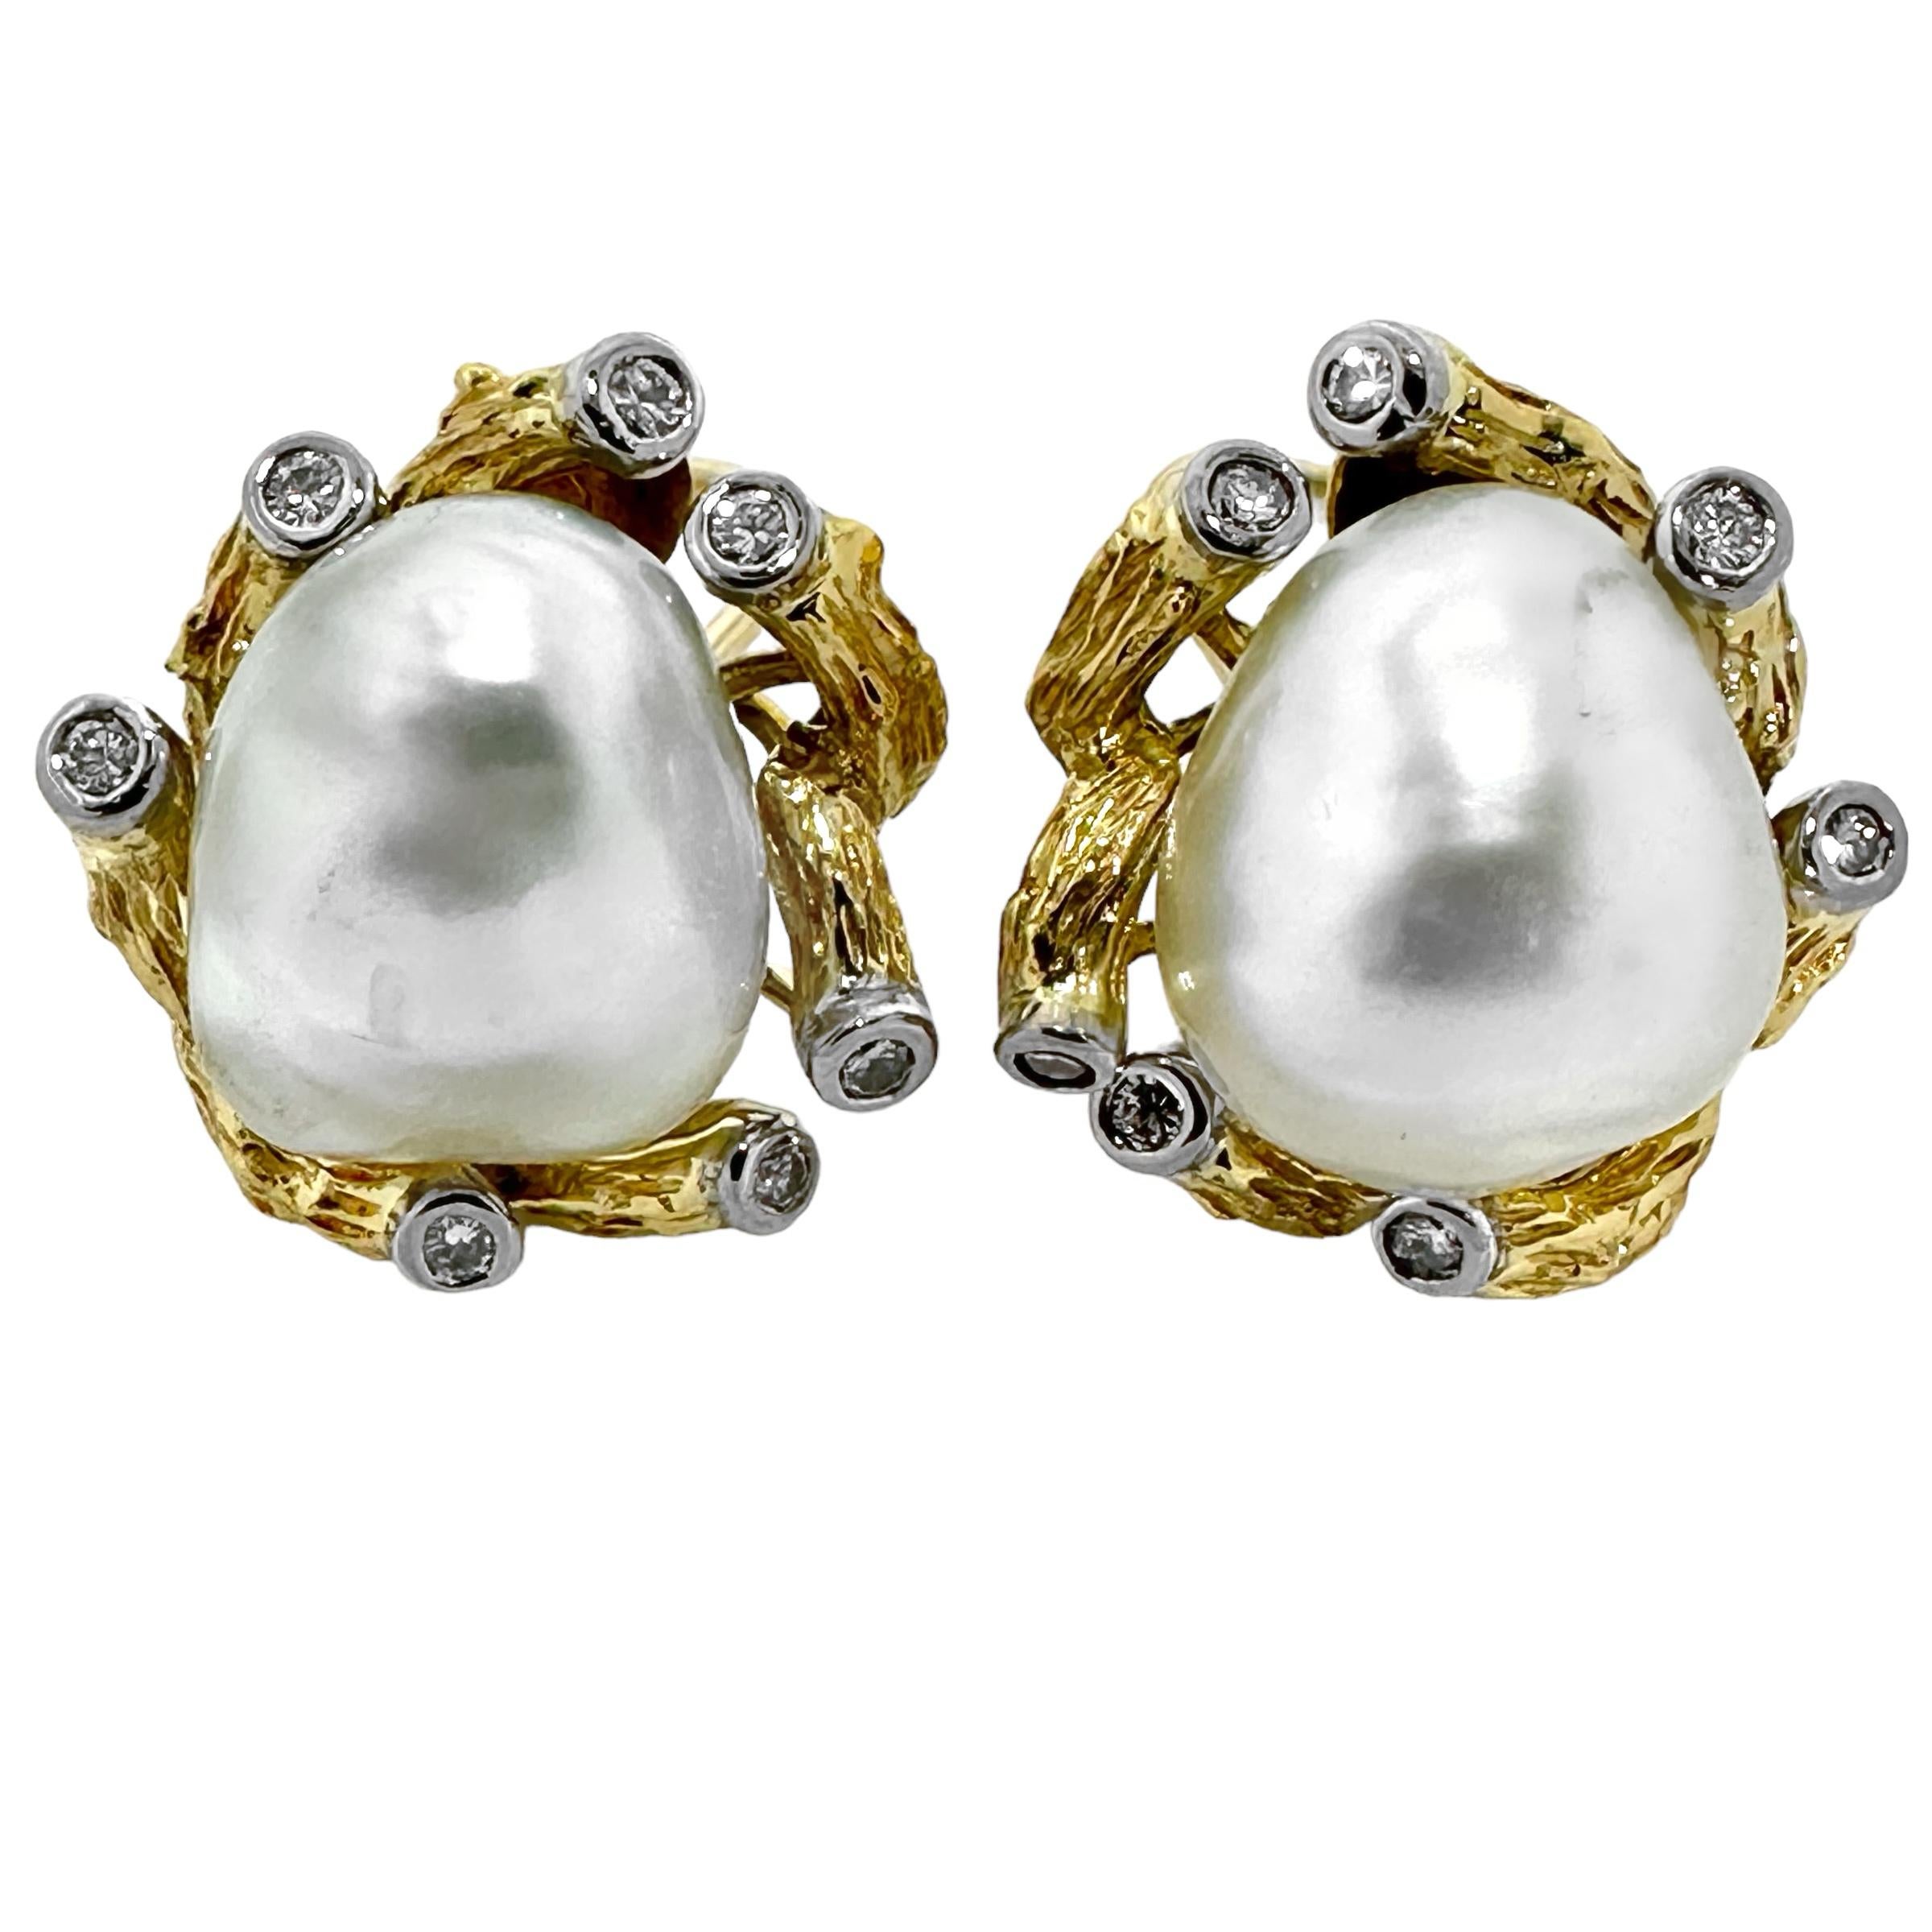 This unique pair of Trio, Mid-20th Century, 18k yellow gold, platinum, semi-baroque pearl and diamond foliate motif earrings has a natural, organic feel. Two 16mm semi-baroque, silver white, lustrous cultured pearls are nestled in a field of deep